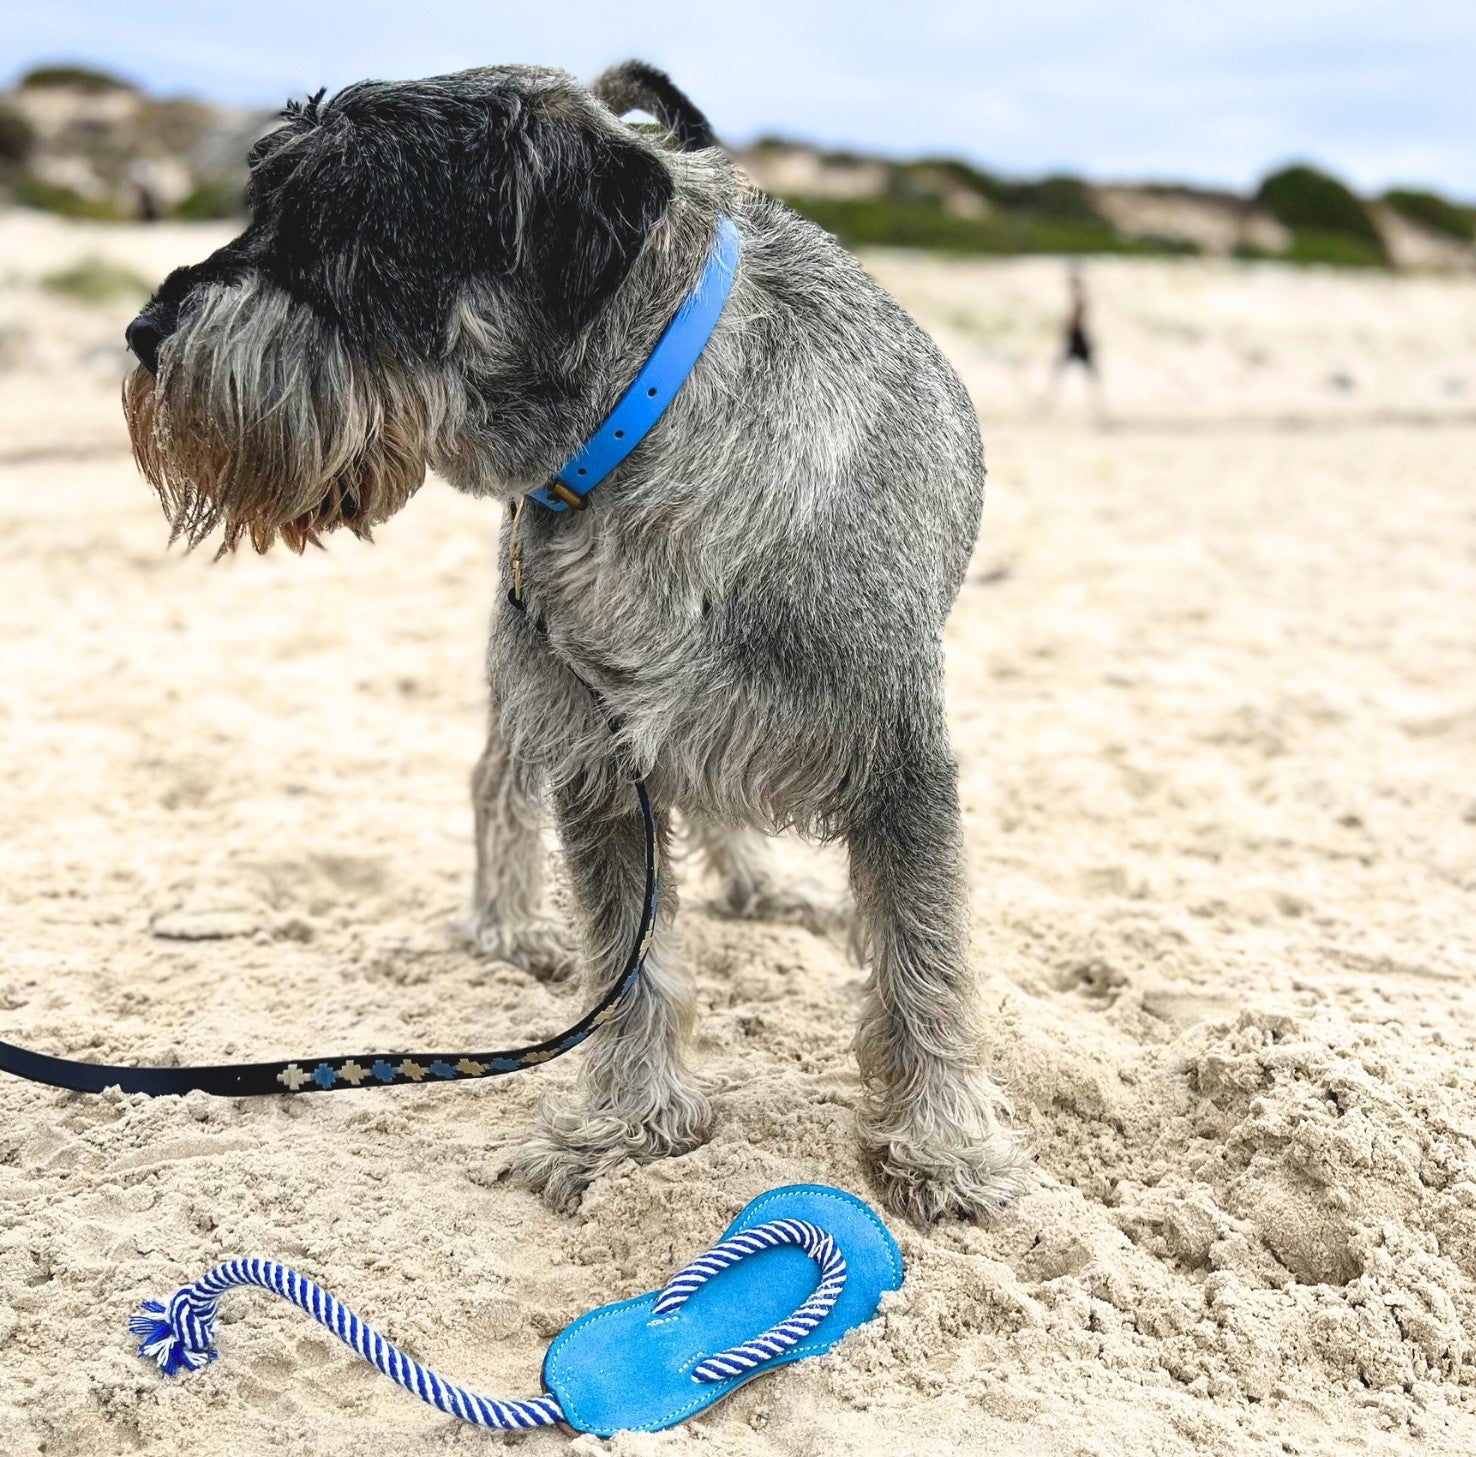 A curious schnauzer with a Georgie Paws blue Jandal stands on sandy beach, gazing into the distance, with a compostable chew toy lying at its feet, seemingly taking a break from play.